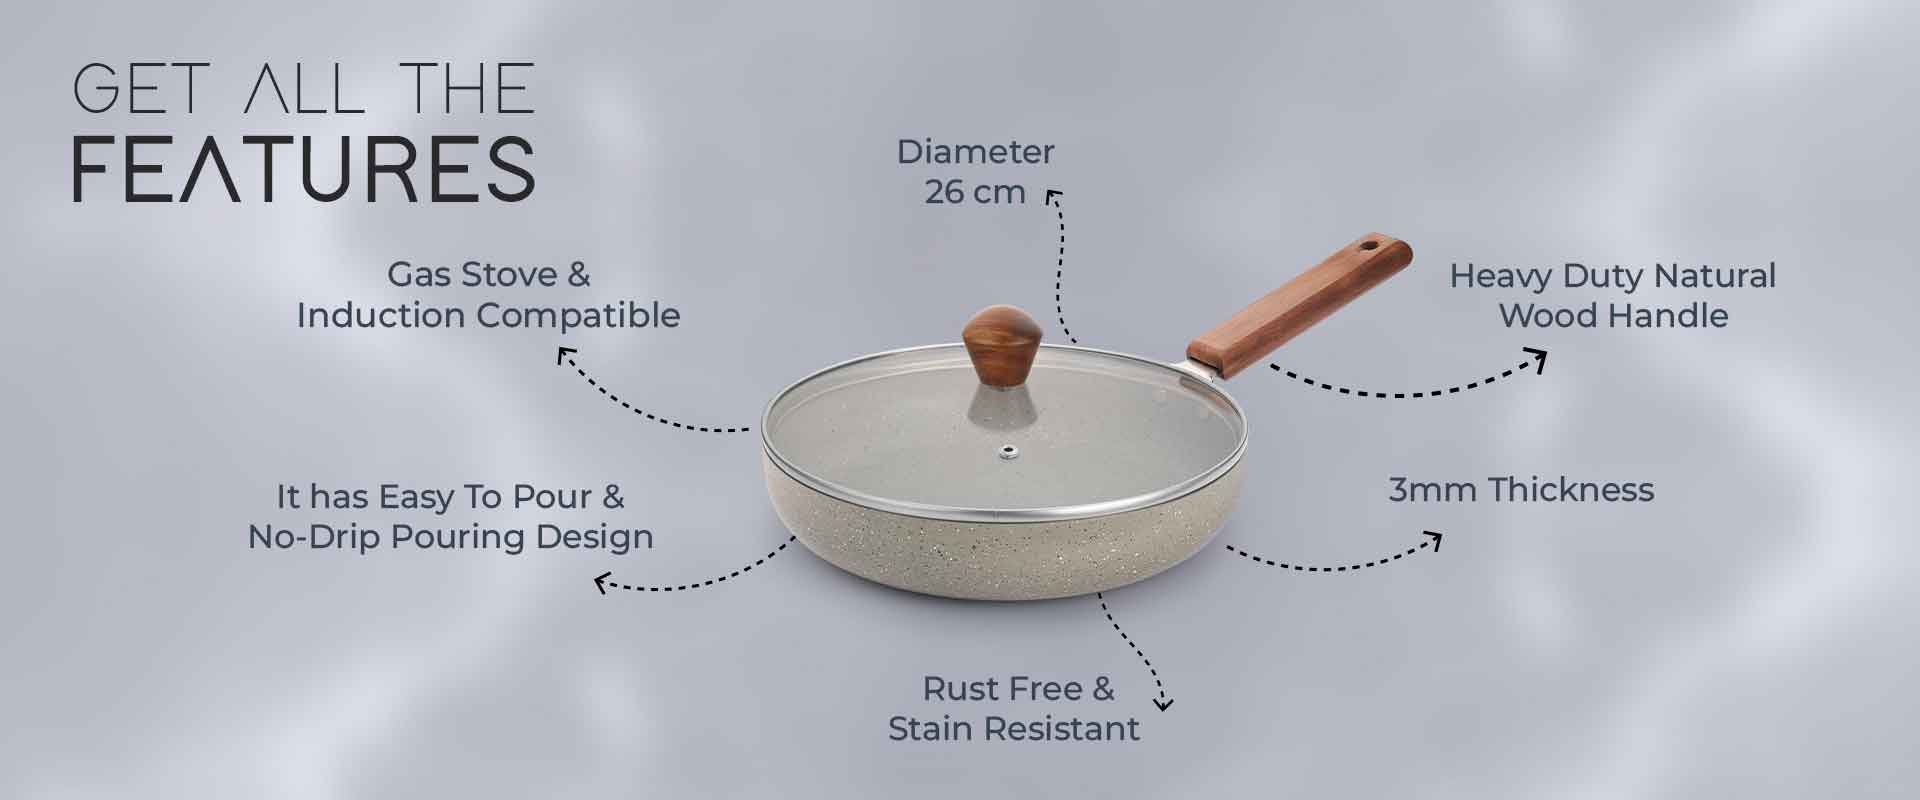 Feature Loaded Fry Pan